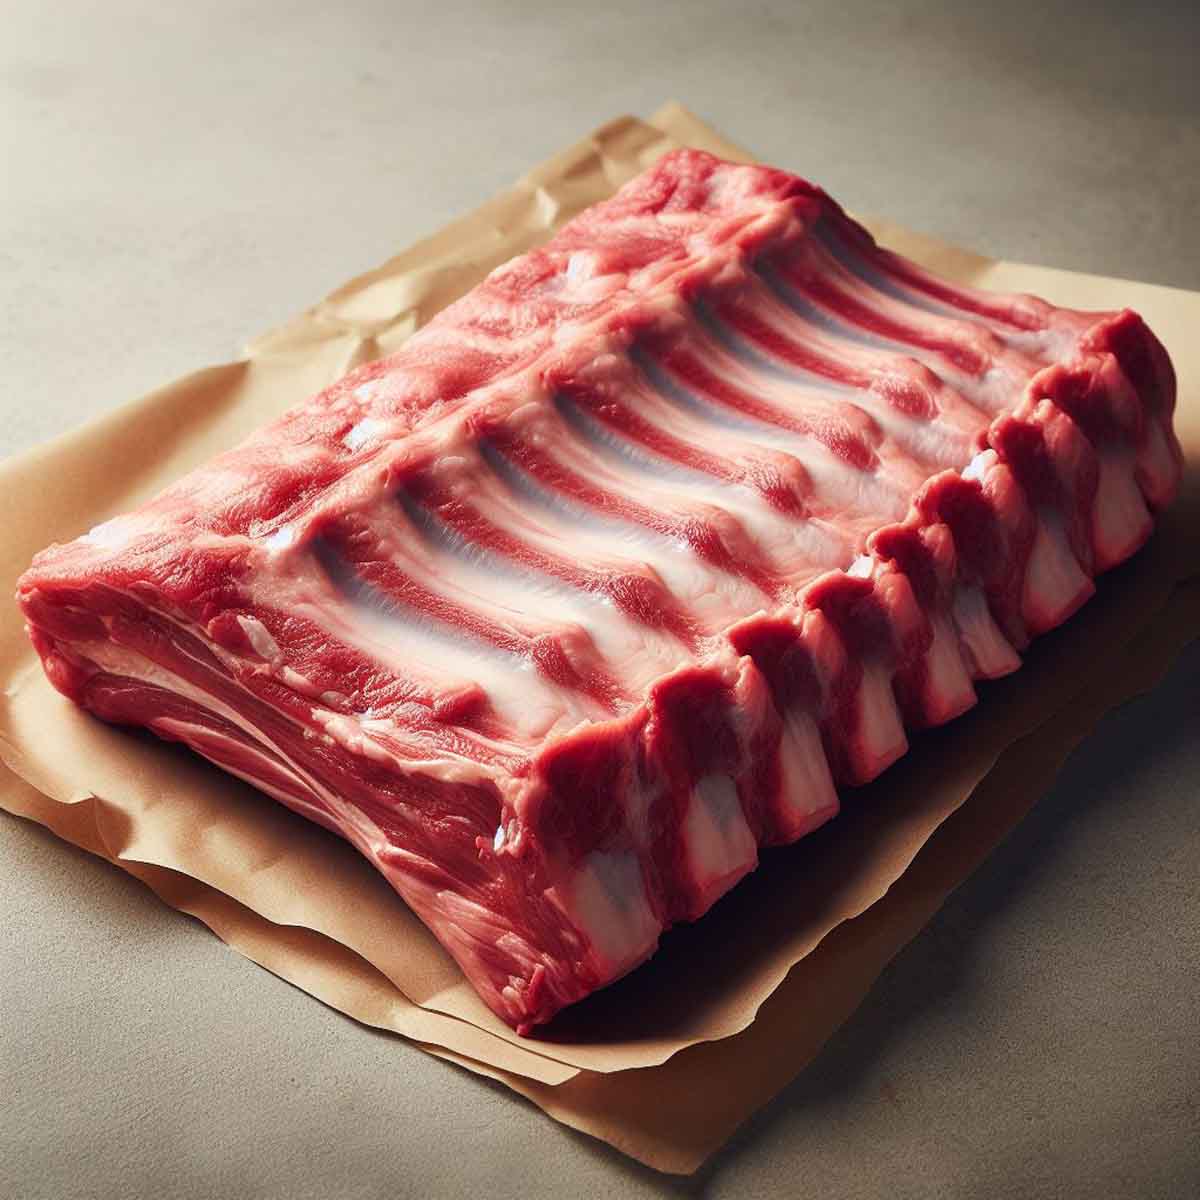 Raw ribs laid out on a clean surface with kitchen tools, ready for seasoning.